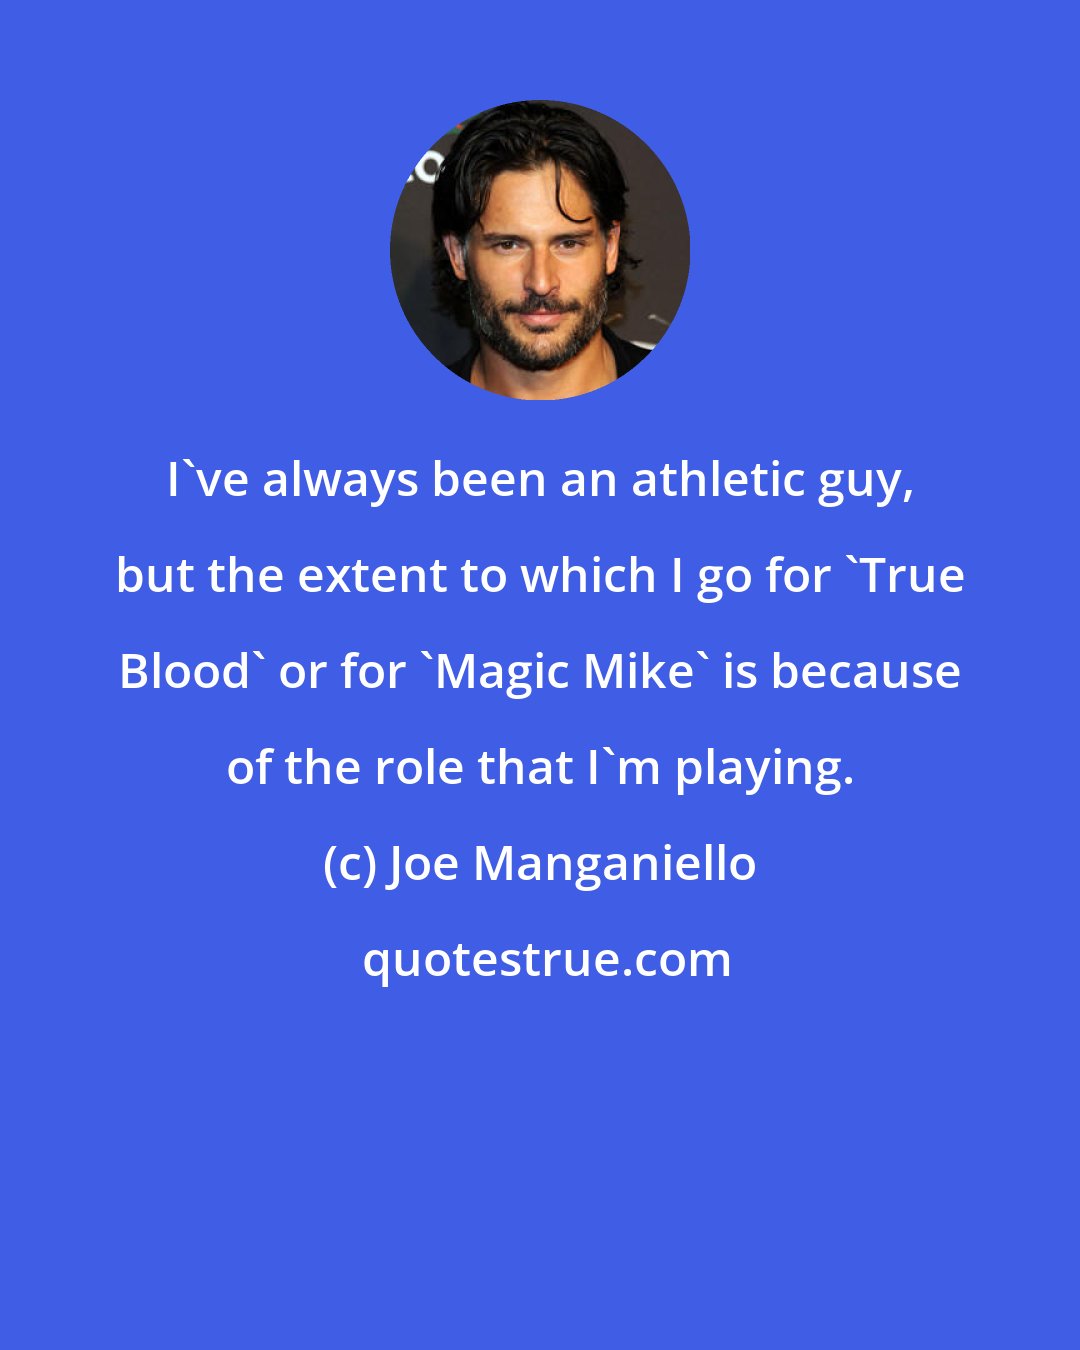 Joe Manganiello: I've always been an athletic guy, but the extent to which I go for 'True Blood' or for 'Magic Mike' is because of the role that I'm playing.